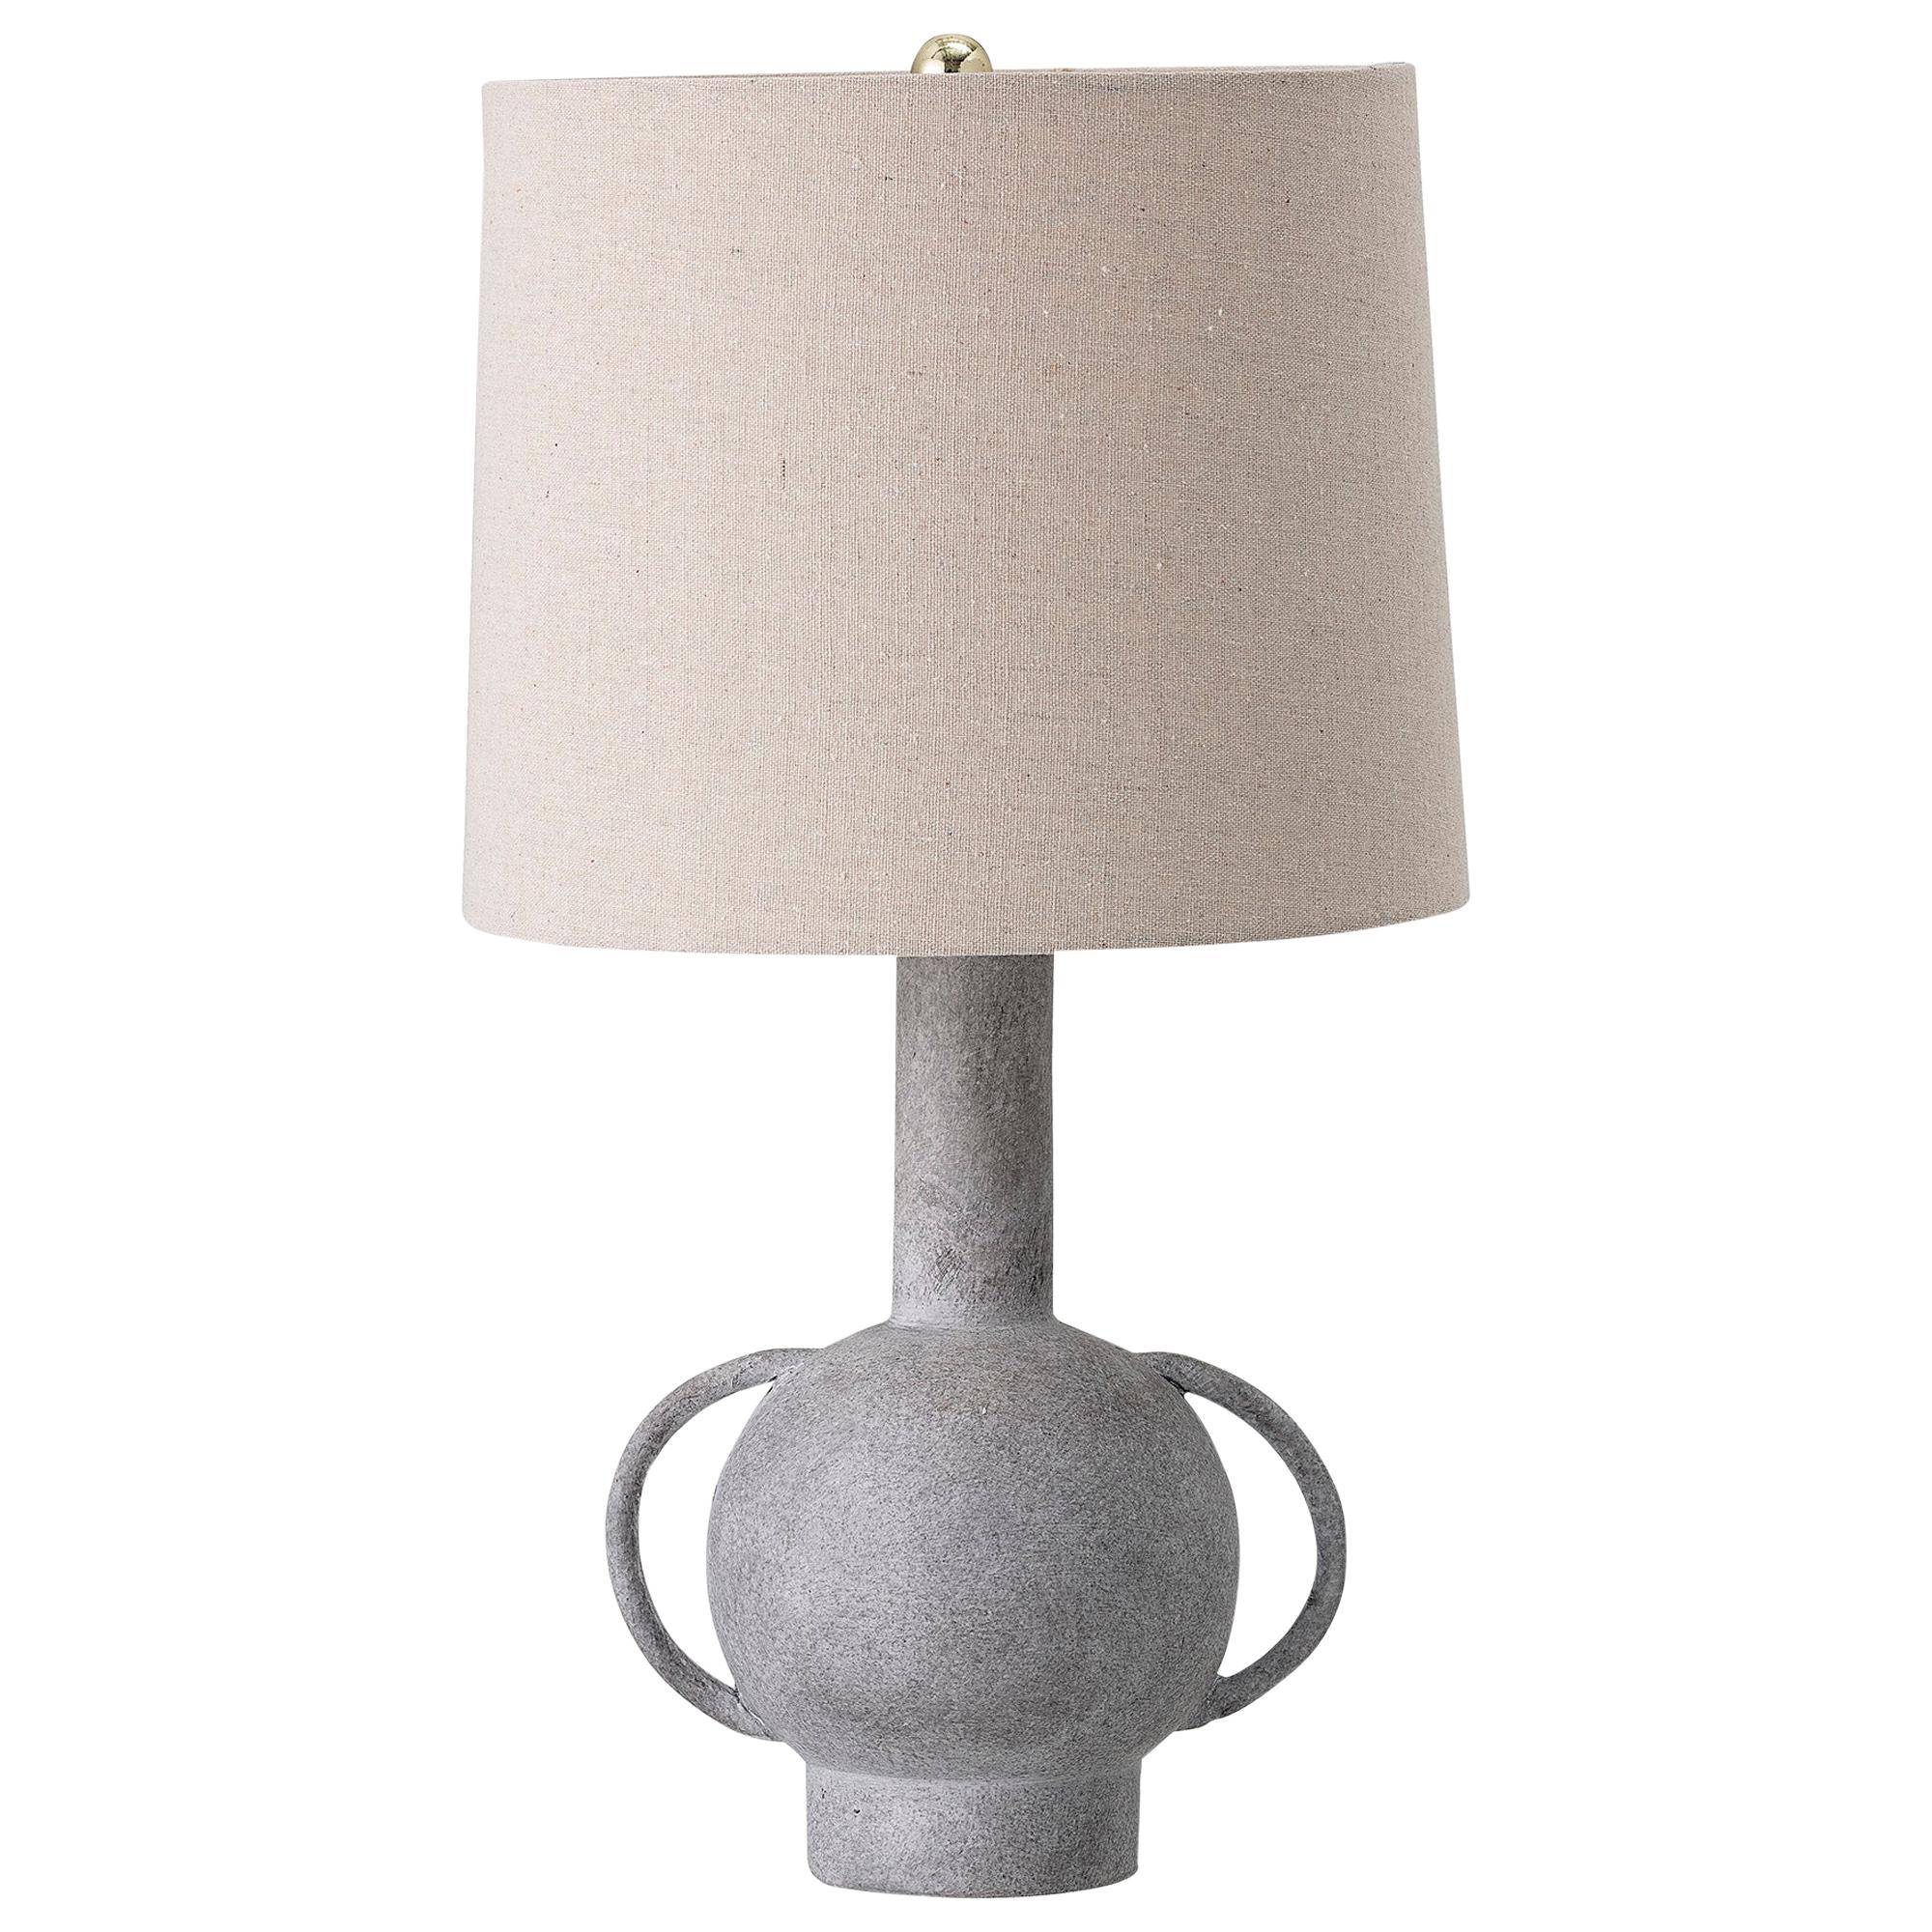 Terracotta Molded and Iron Cast Table Lamp with Linen Lampshade